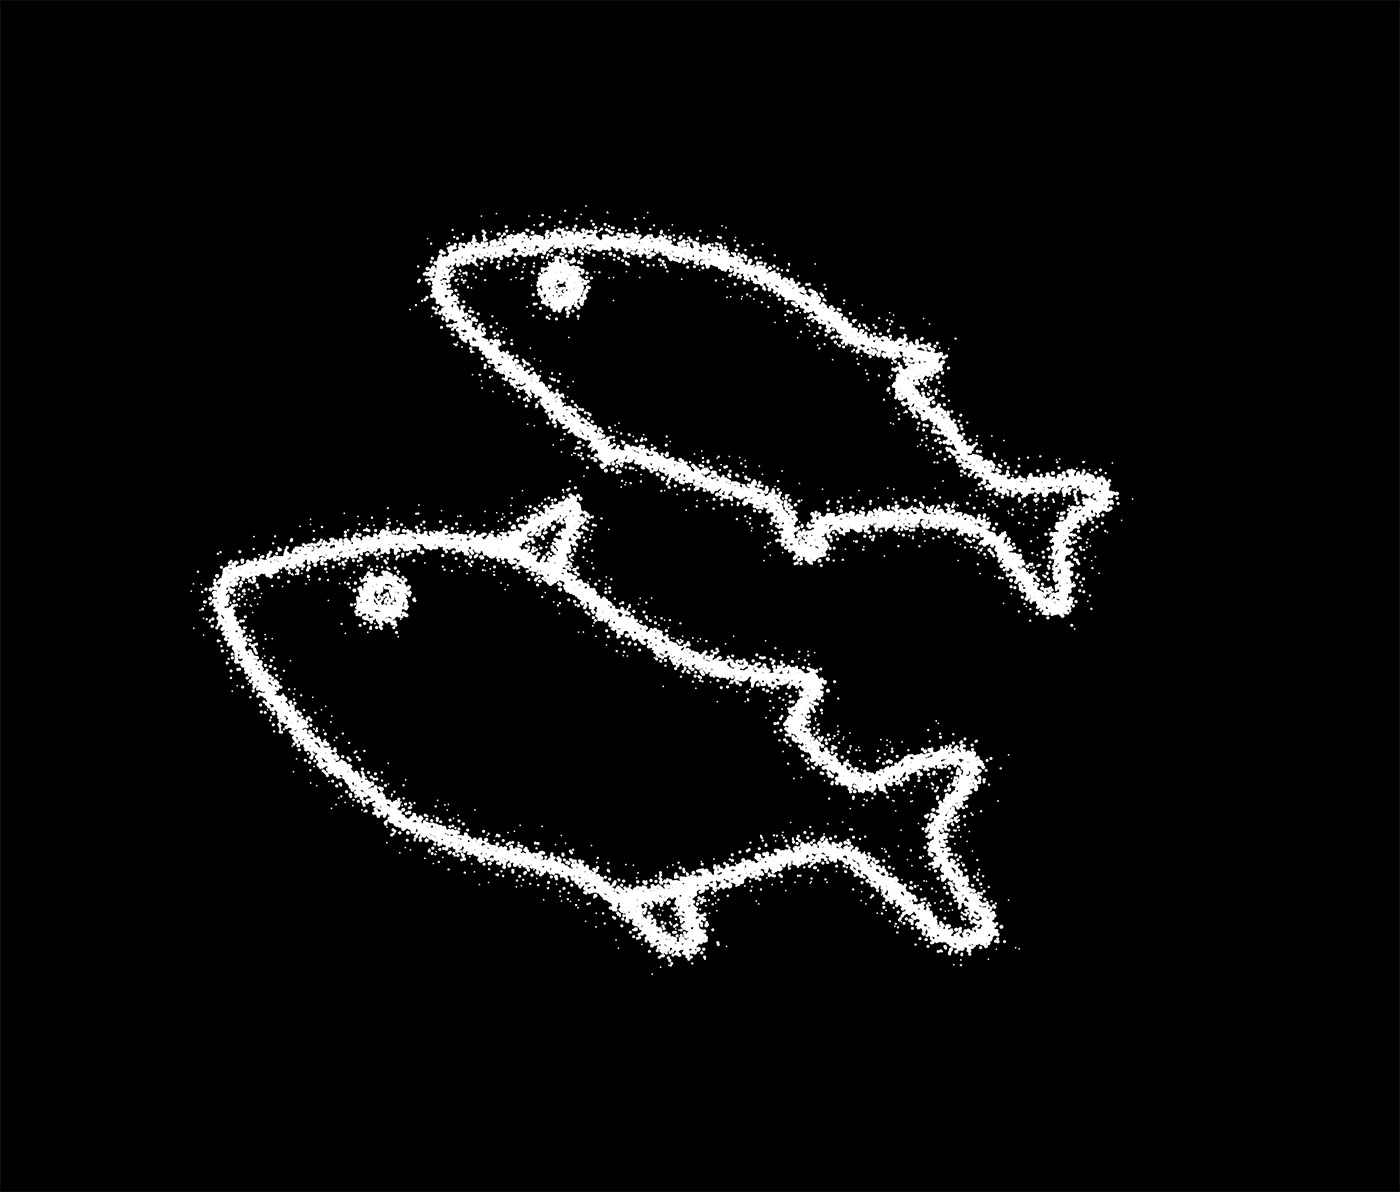 White outlines of two fish on a back blackground. - click to view larger image